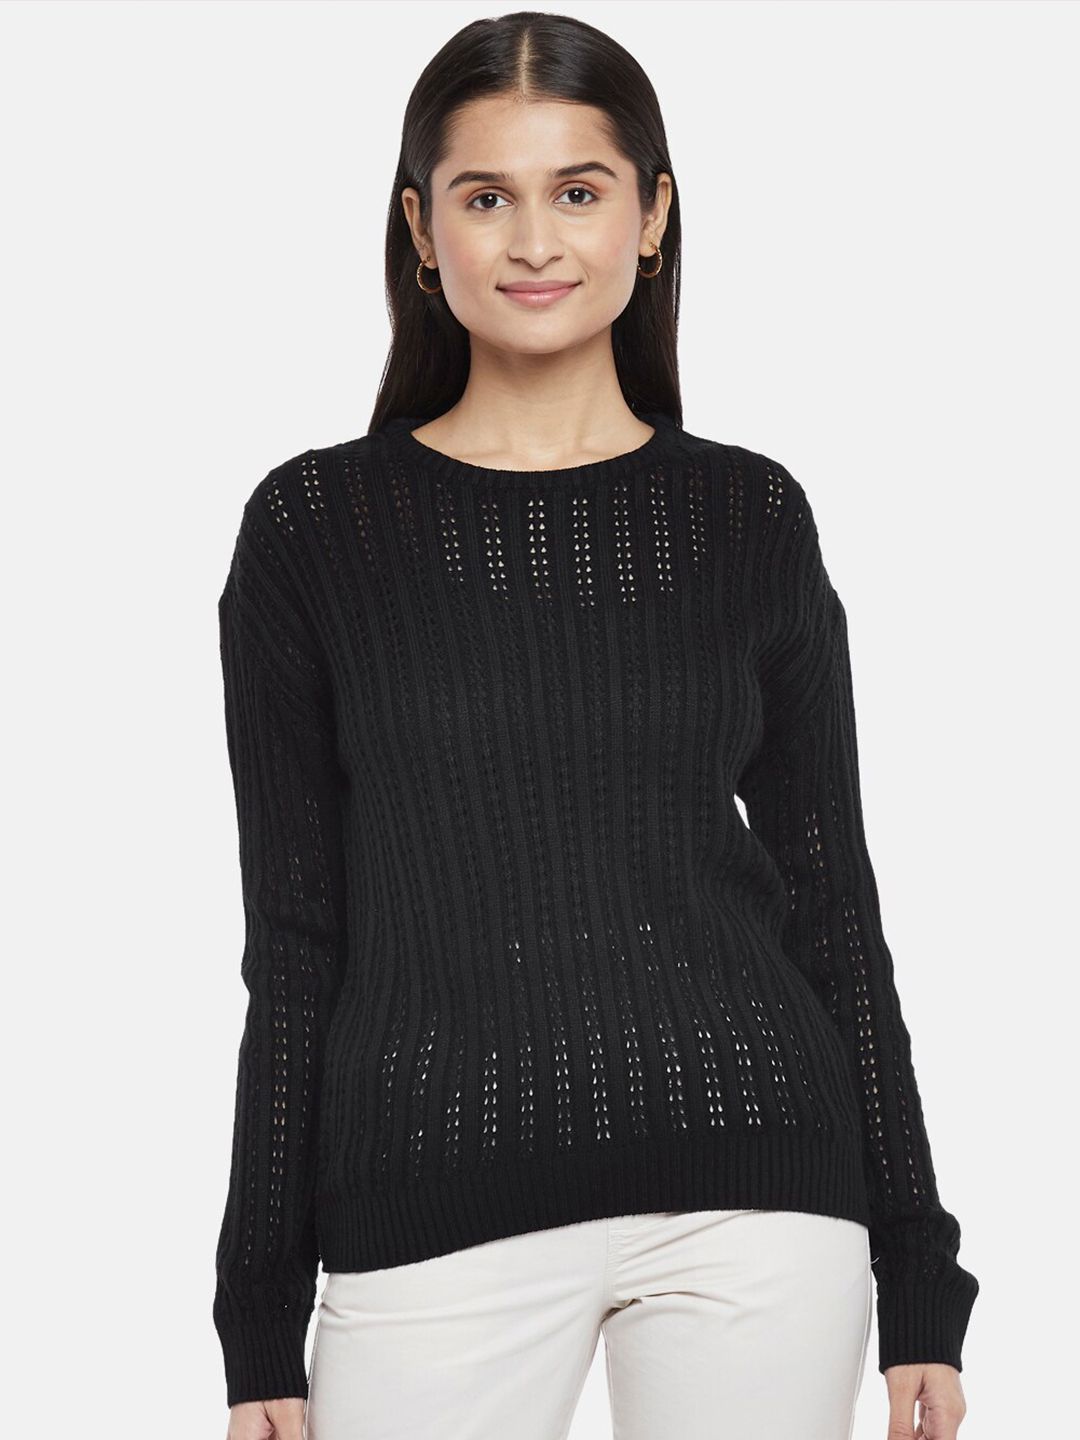 Honey by Pantaloons Women Black Acrylic Pullover Price in India